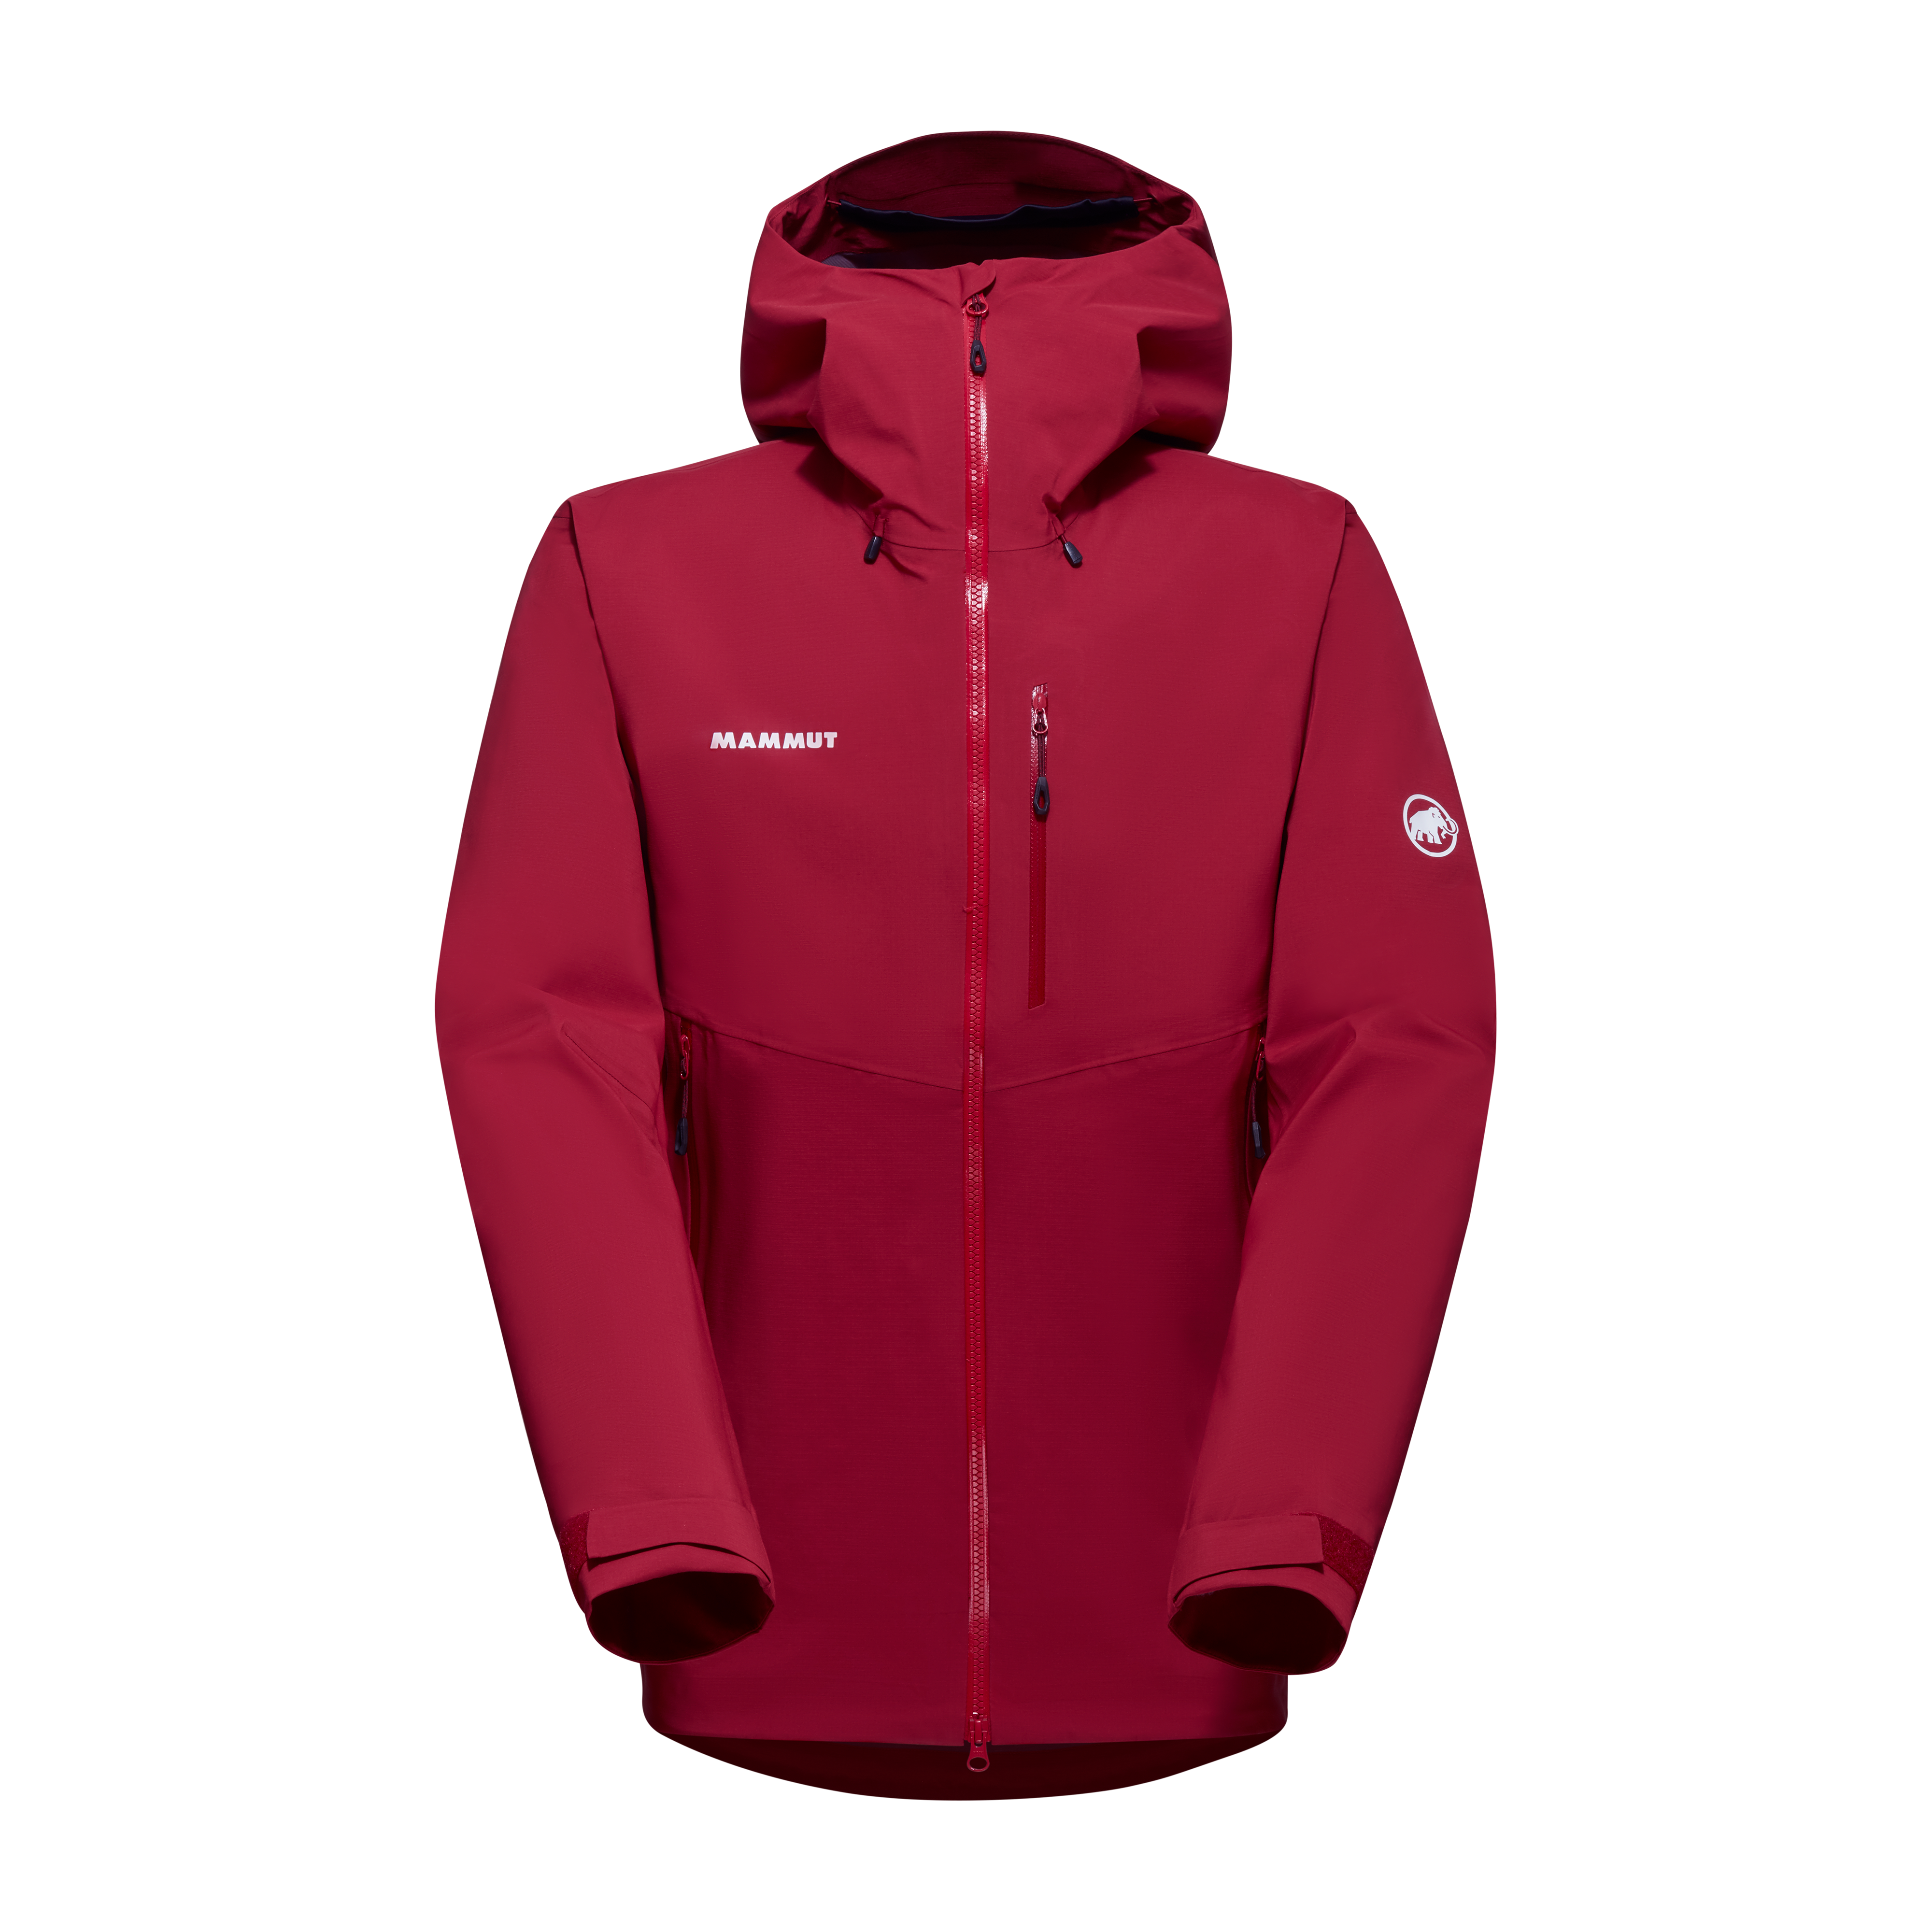 Alto Guide HS Hooded Jacket Men - blood red, S thumbnail